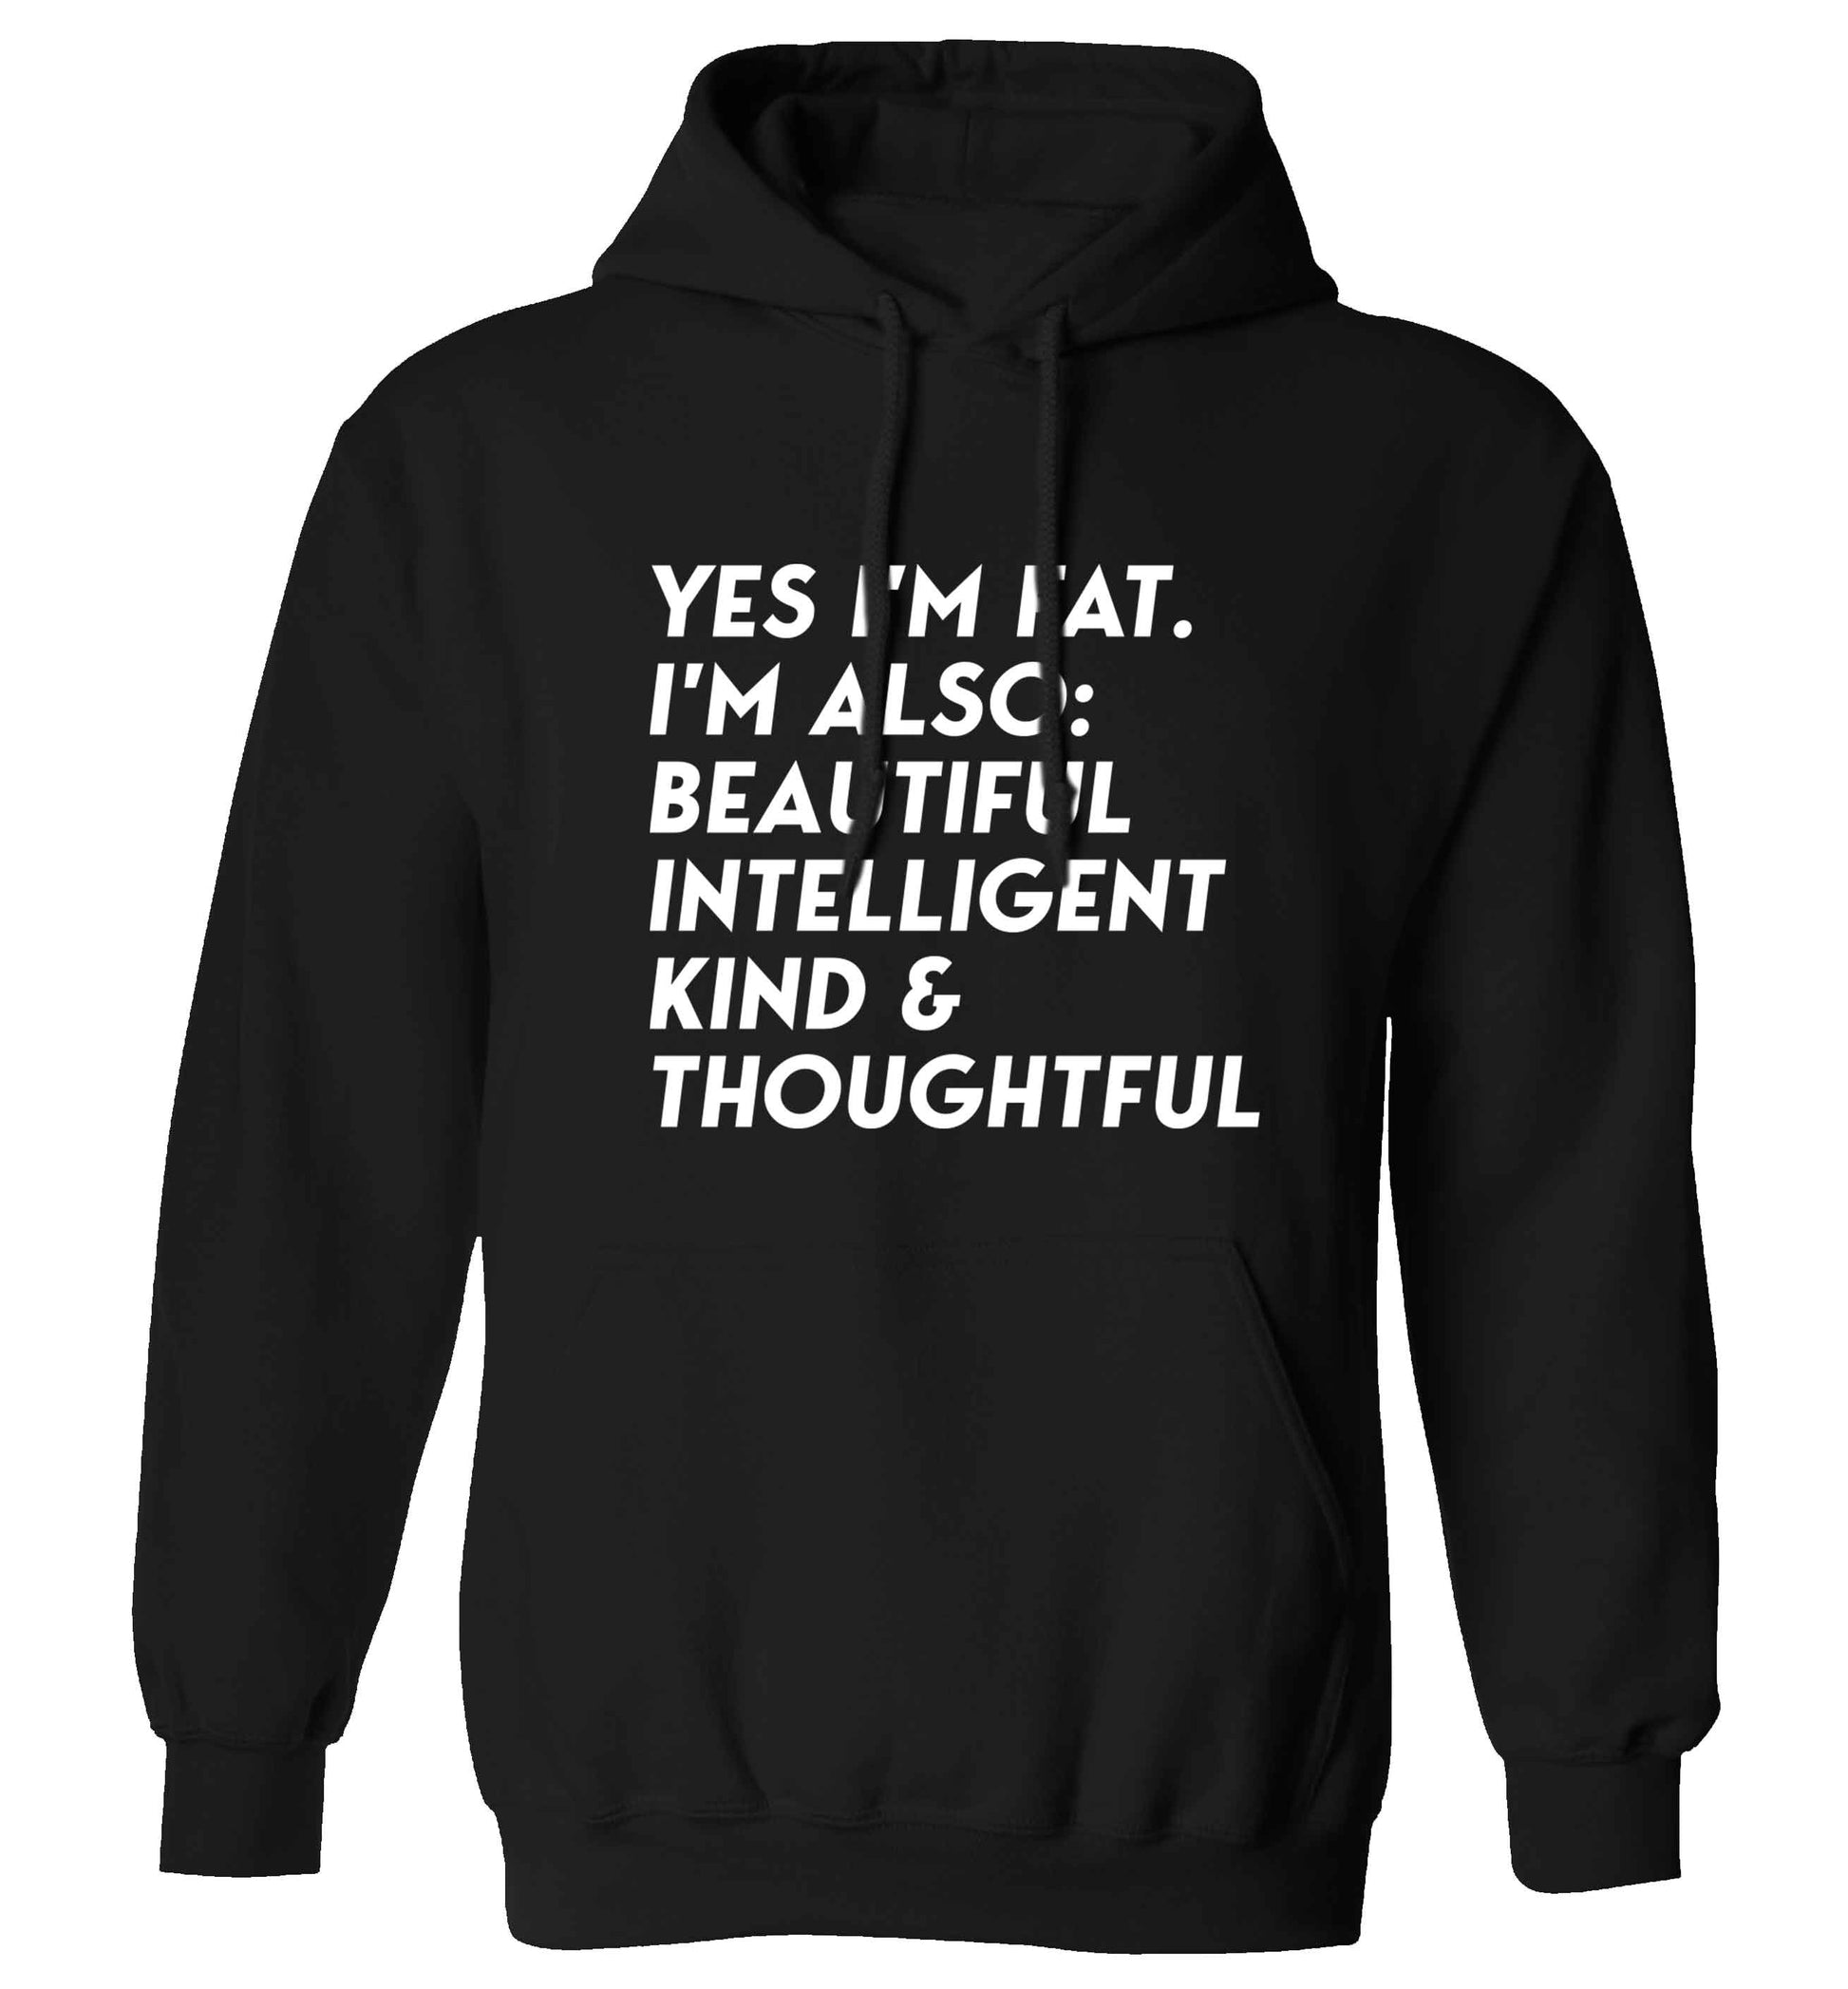 Yes I'm fat. I'm also: Beautiful intelligent kind and thoughtful adults unisex black hoodie 2XL